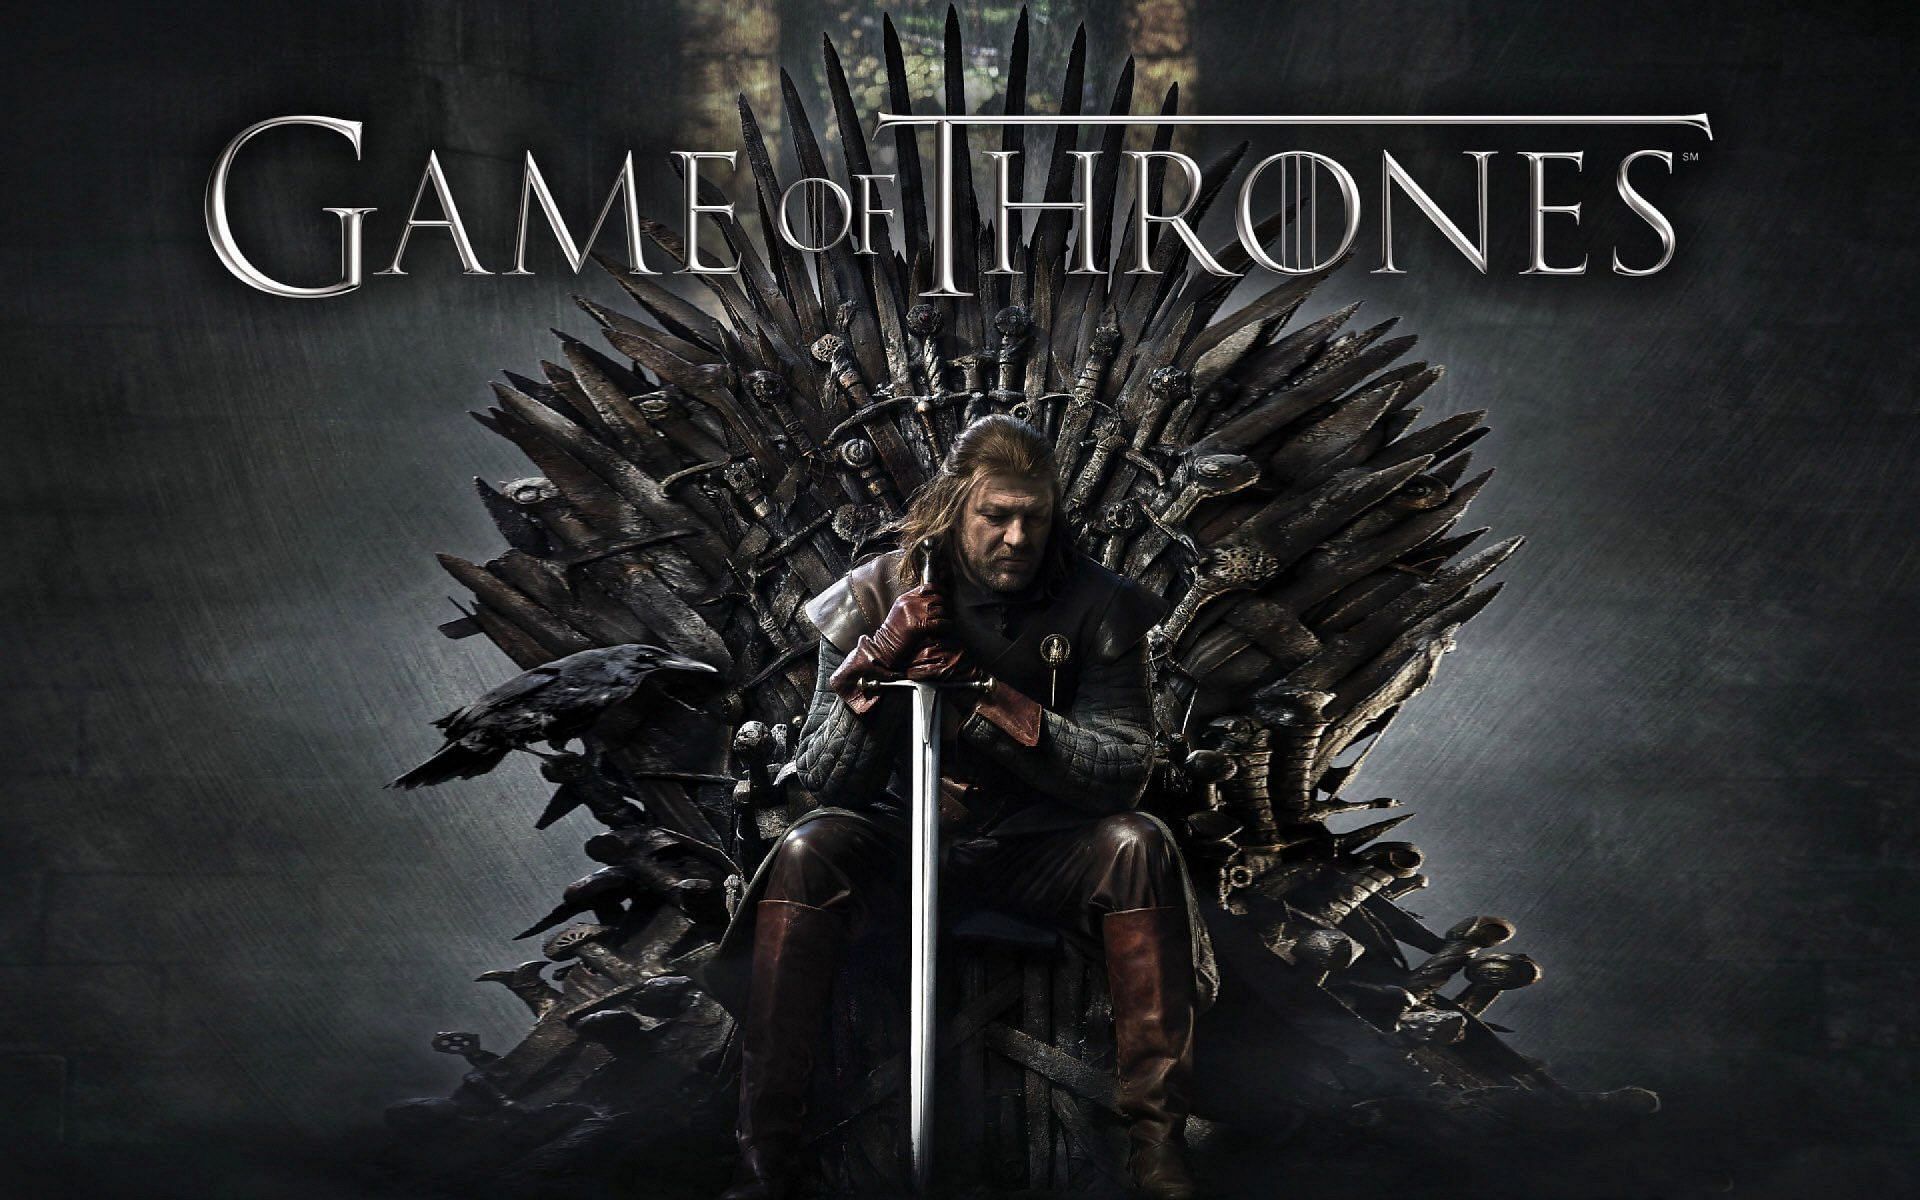 6 Game of Thrones spinoffs that are all under development